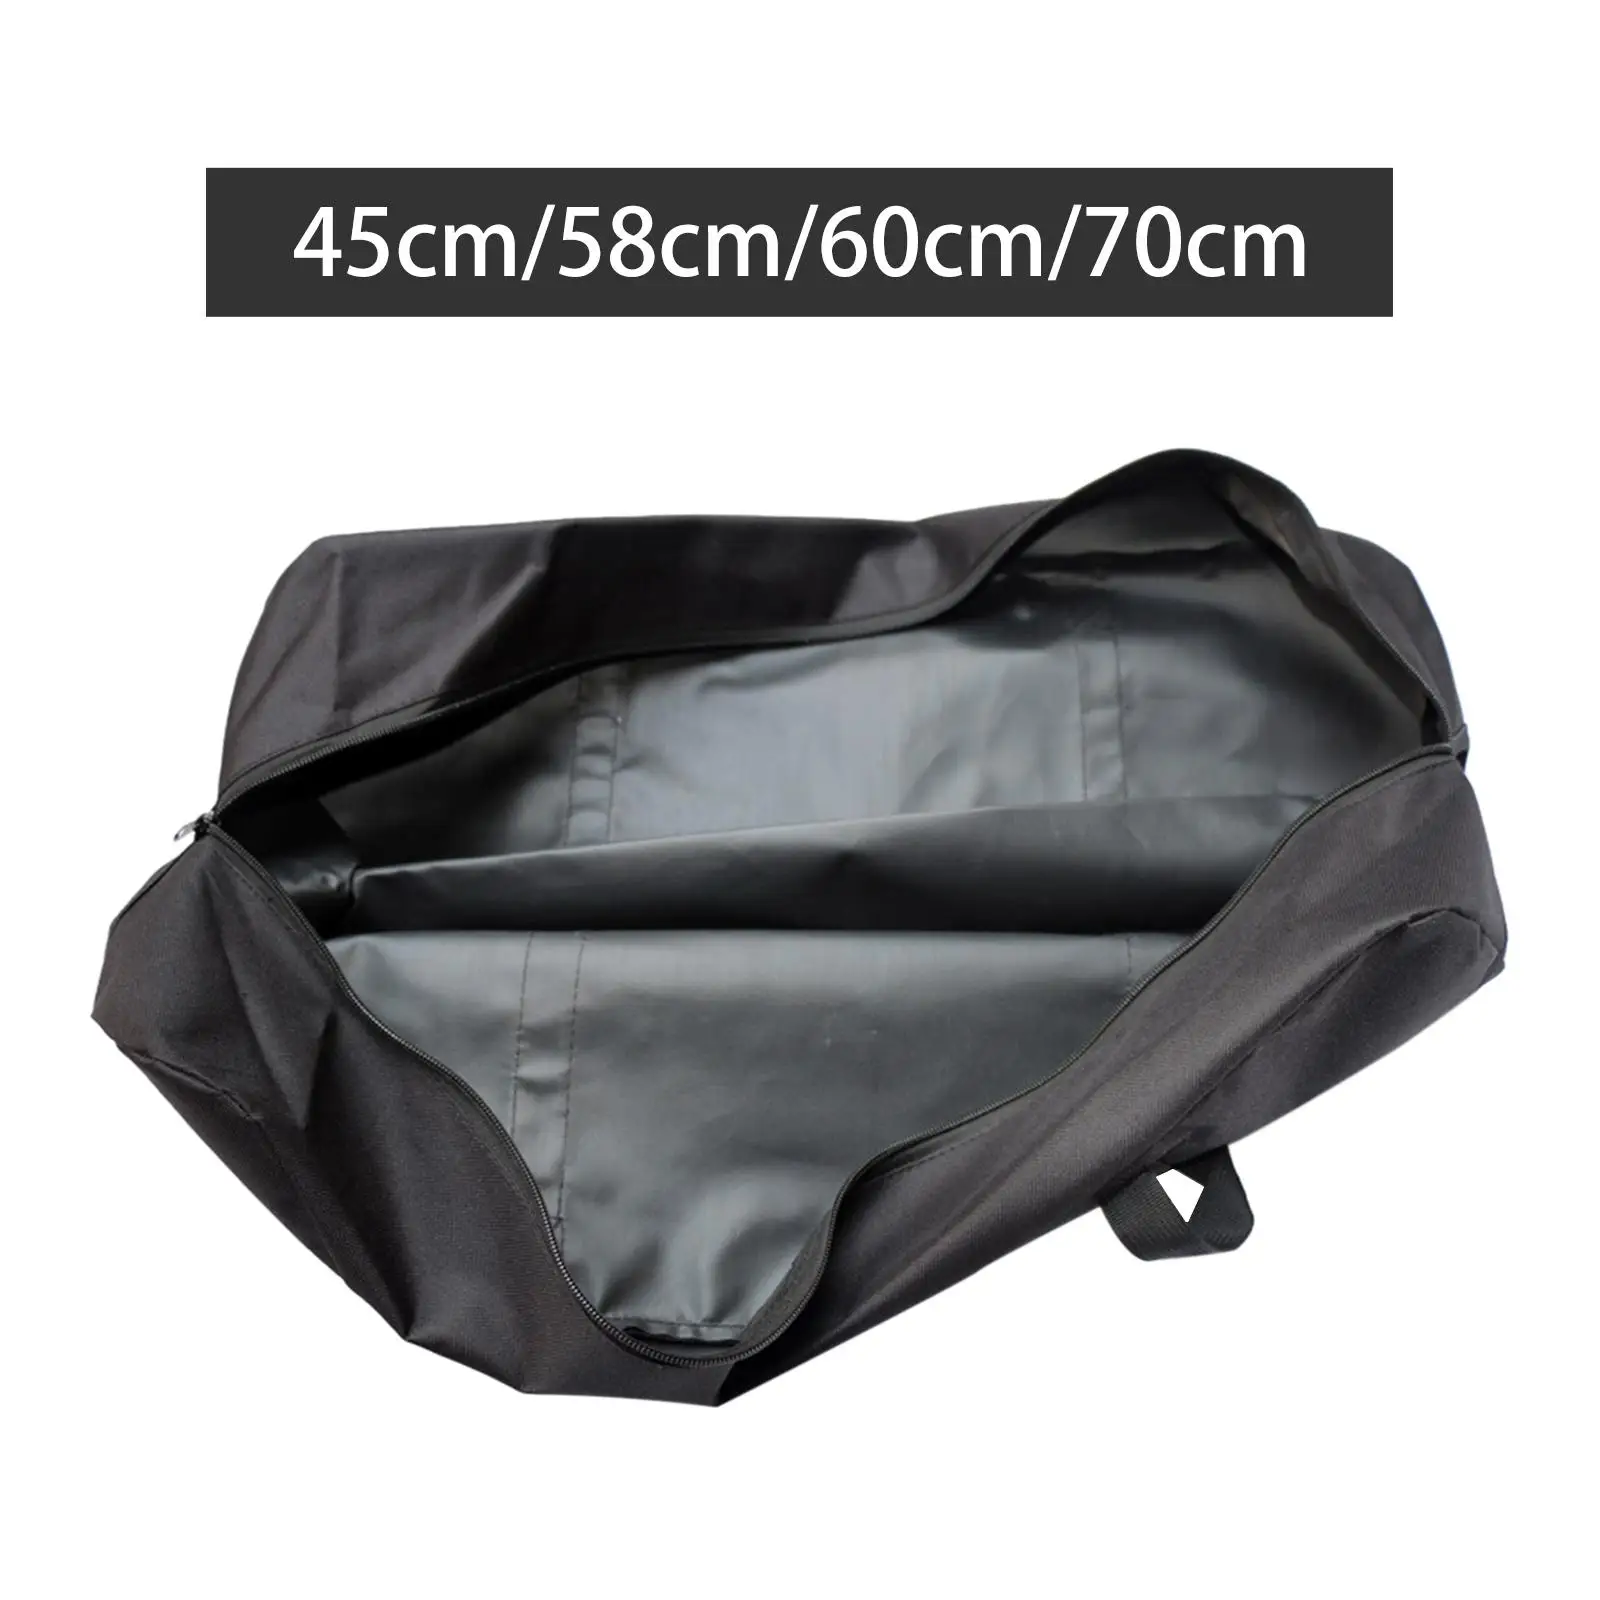 Grill Storage Bag Thicken Oxford Cloth Fittings Wear Resistant for Camp Barbecue